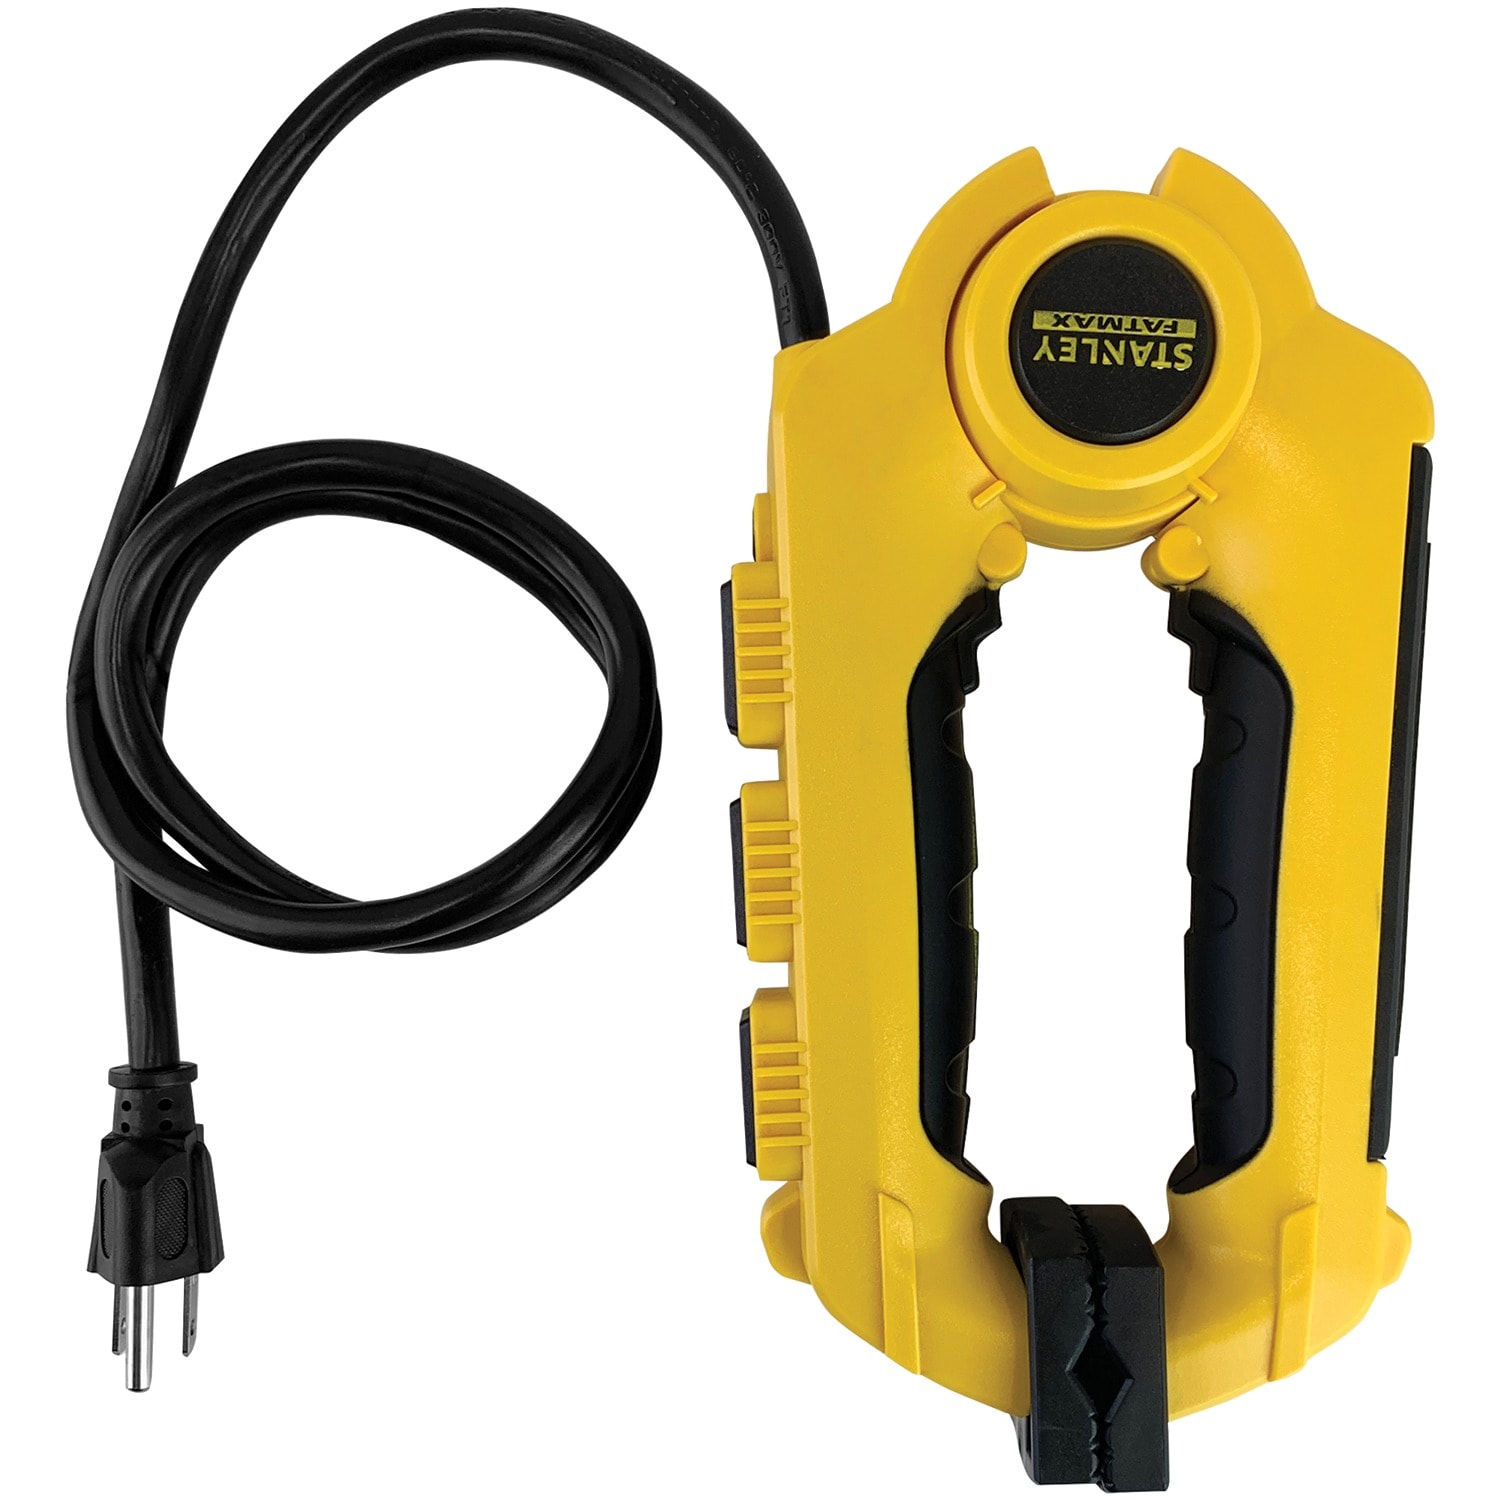 Stanley 3-Outlet Indoor Yellow Power Strip at